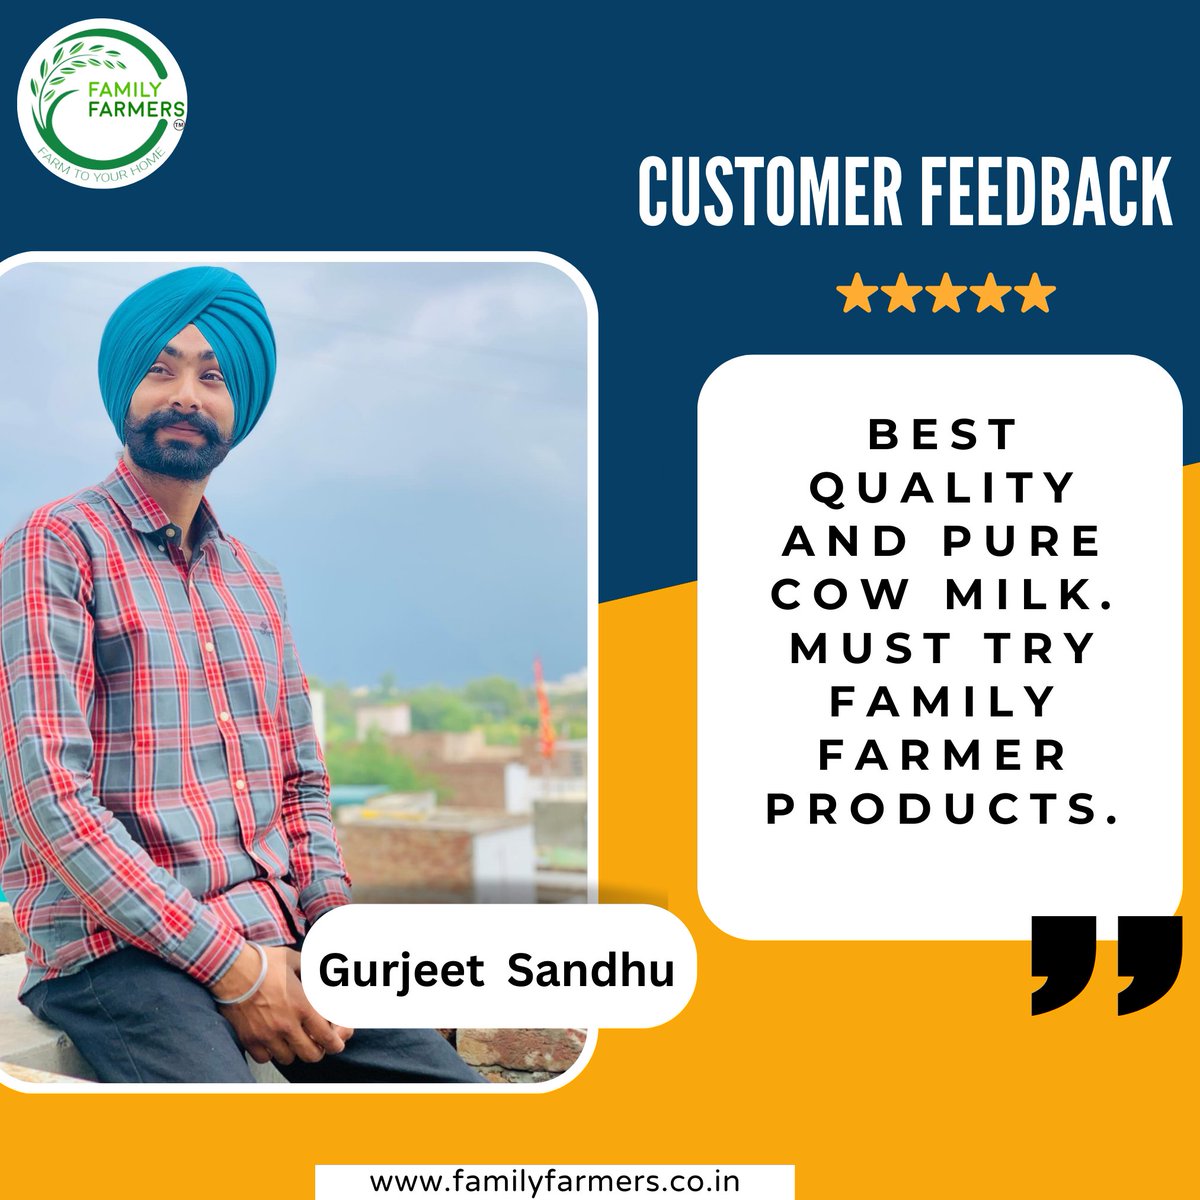 Family farmers #clientappreciation Your reviews are the building blocks of our success story. Together, we're creating something amazing!

#familyfarmers #freshmilk #clients #happyclients #customers #clientreview #a2cowmilk #sahiwalcowmilk #sahiwalmilk